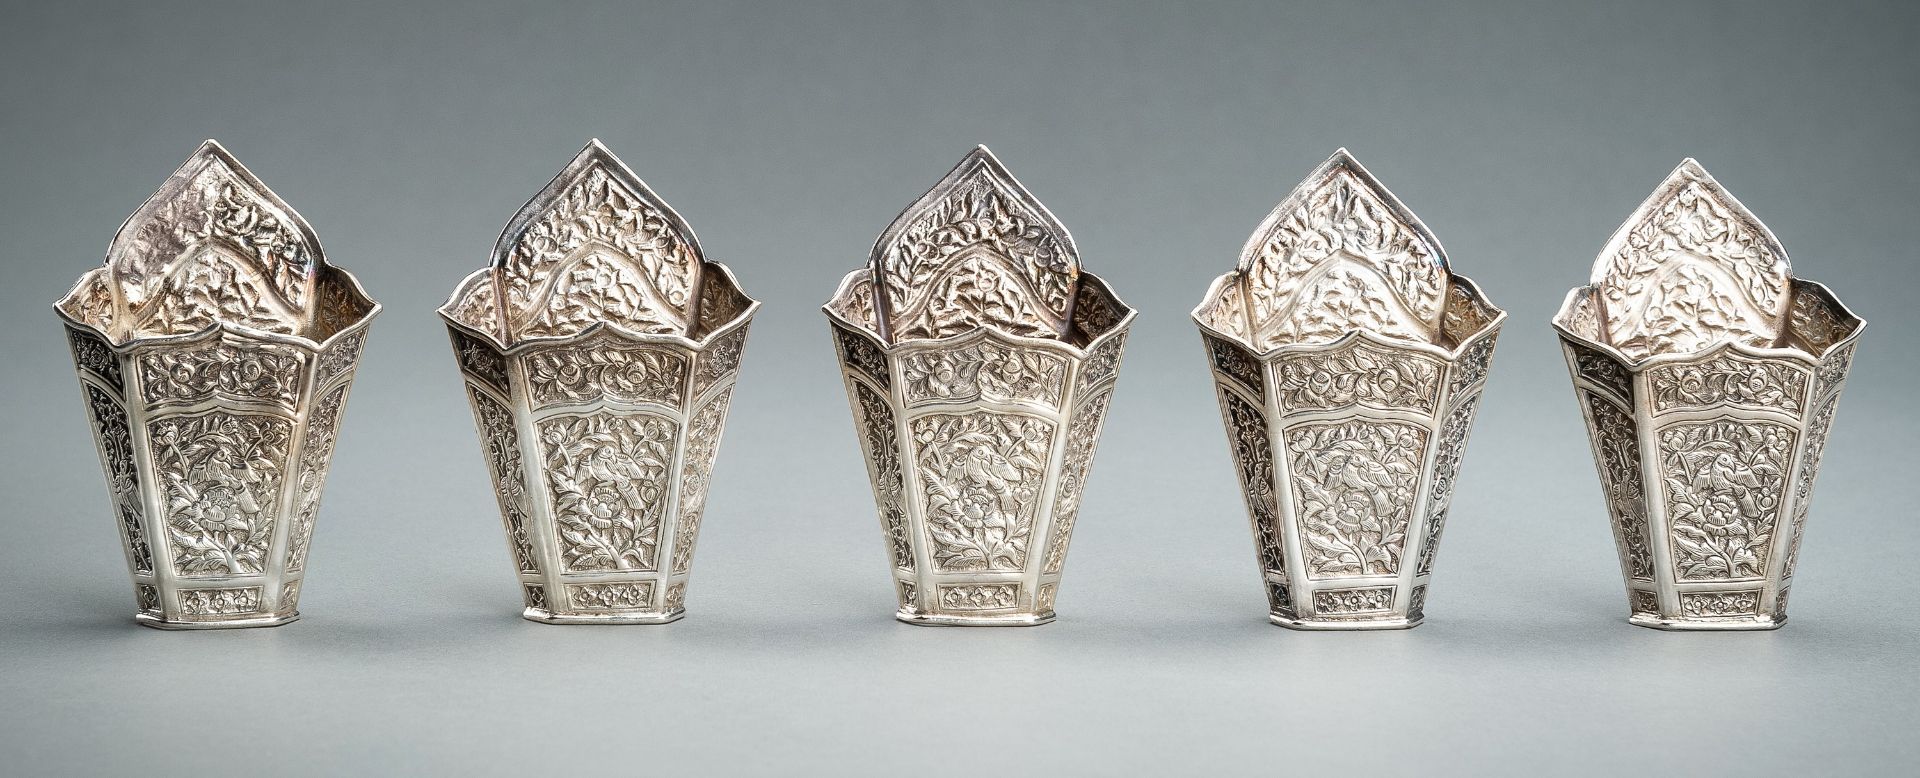 A GROUP OF FIVE EMBOSSED SILVER BETEL LEAF HOLDERS, c. 1900s